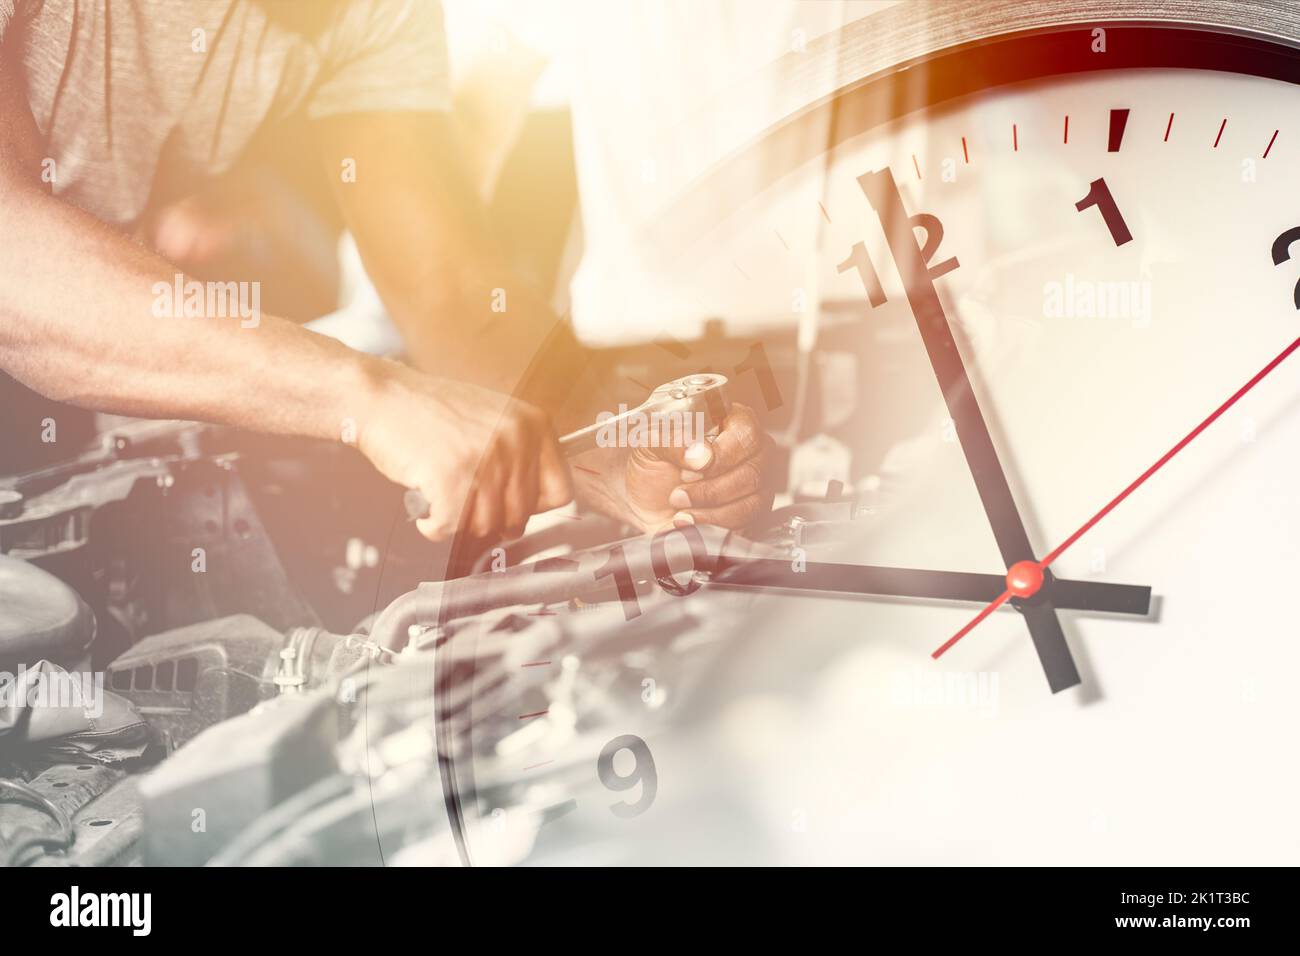 Times to mechanic working service a car. Vehicle inspection engine test and maintenance schedule timing concept. Stock Photo